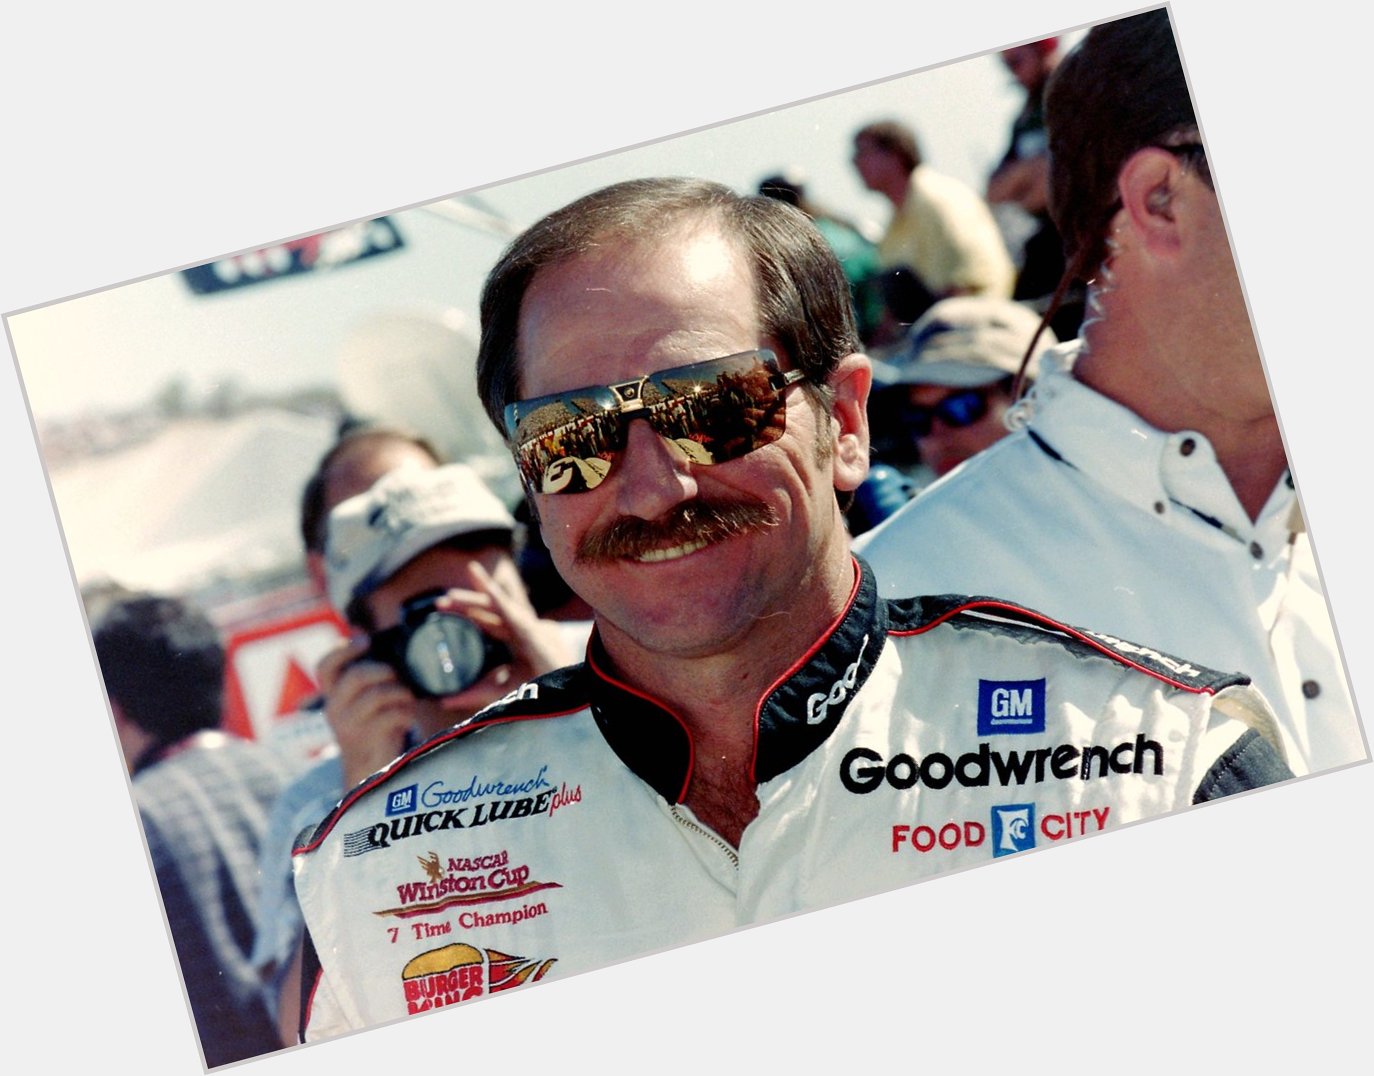 Happy Birthday to the Late Great DALE EARNHARDT. 